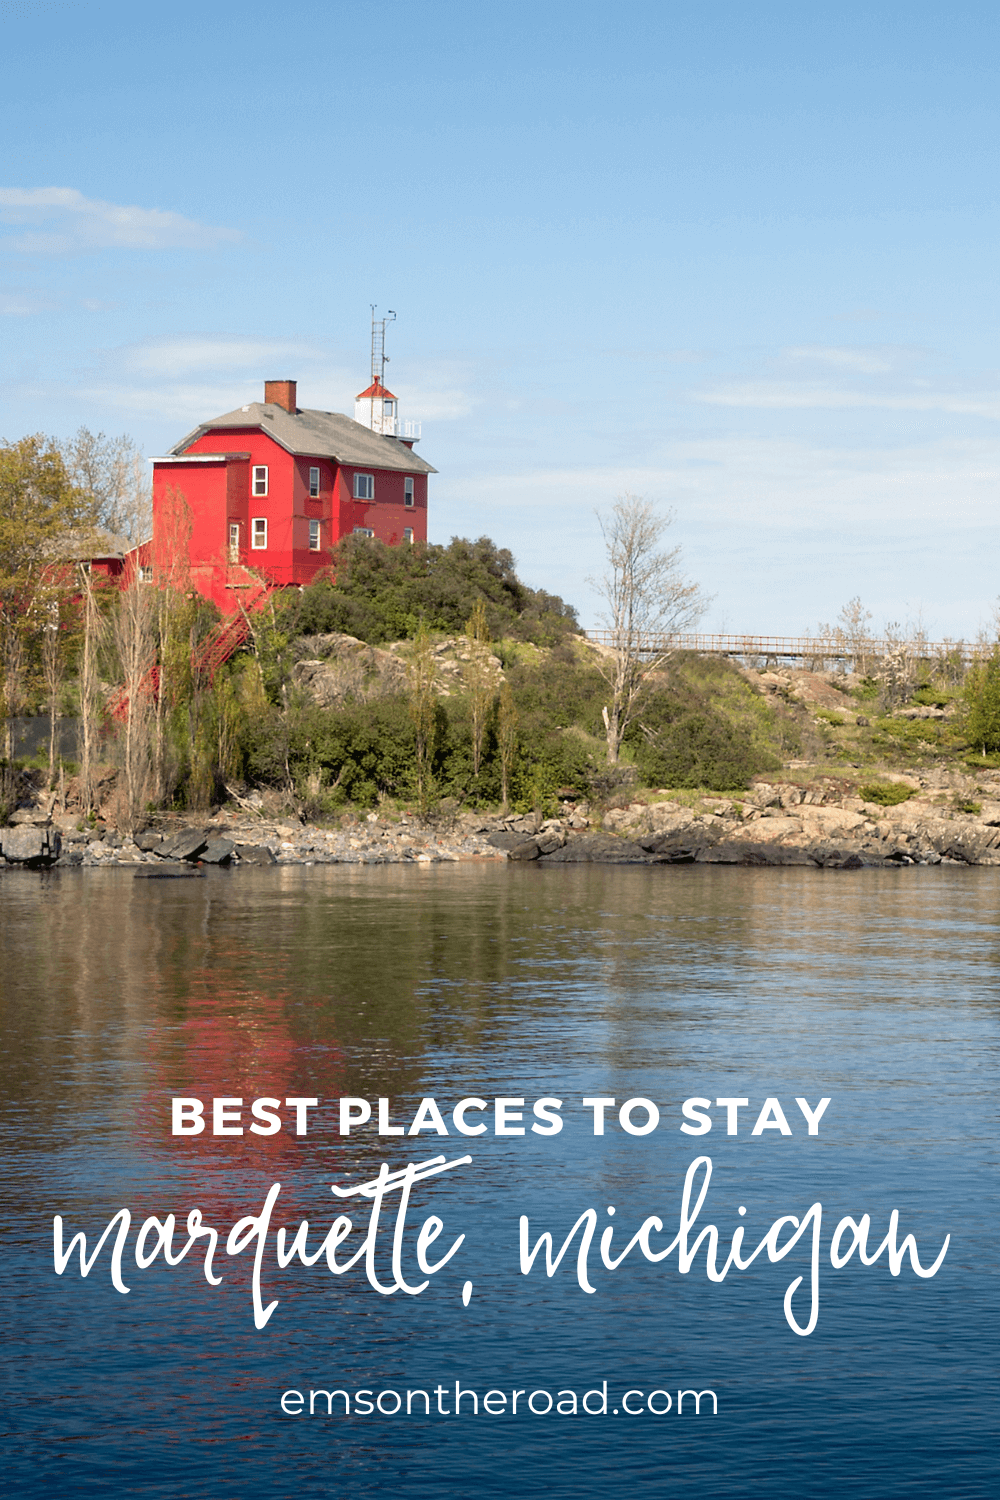 Best Places to Stay in Marquette, Michigan